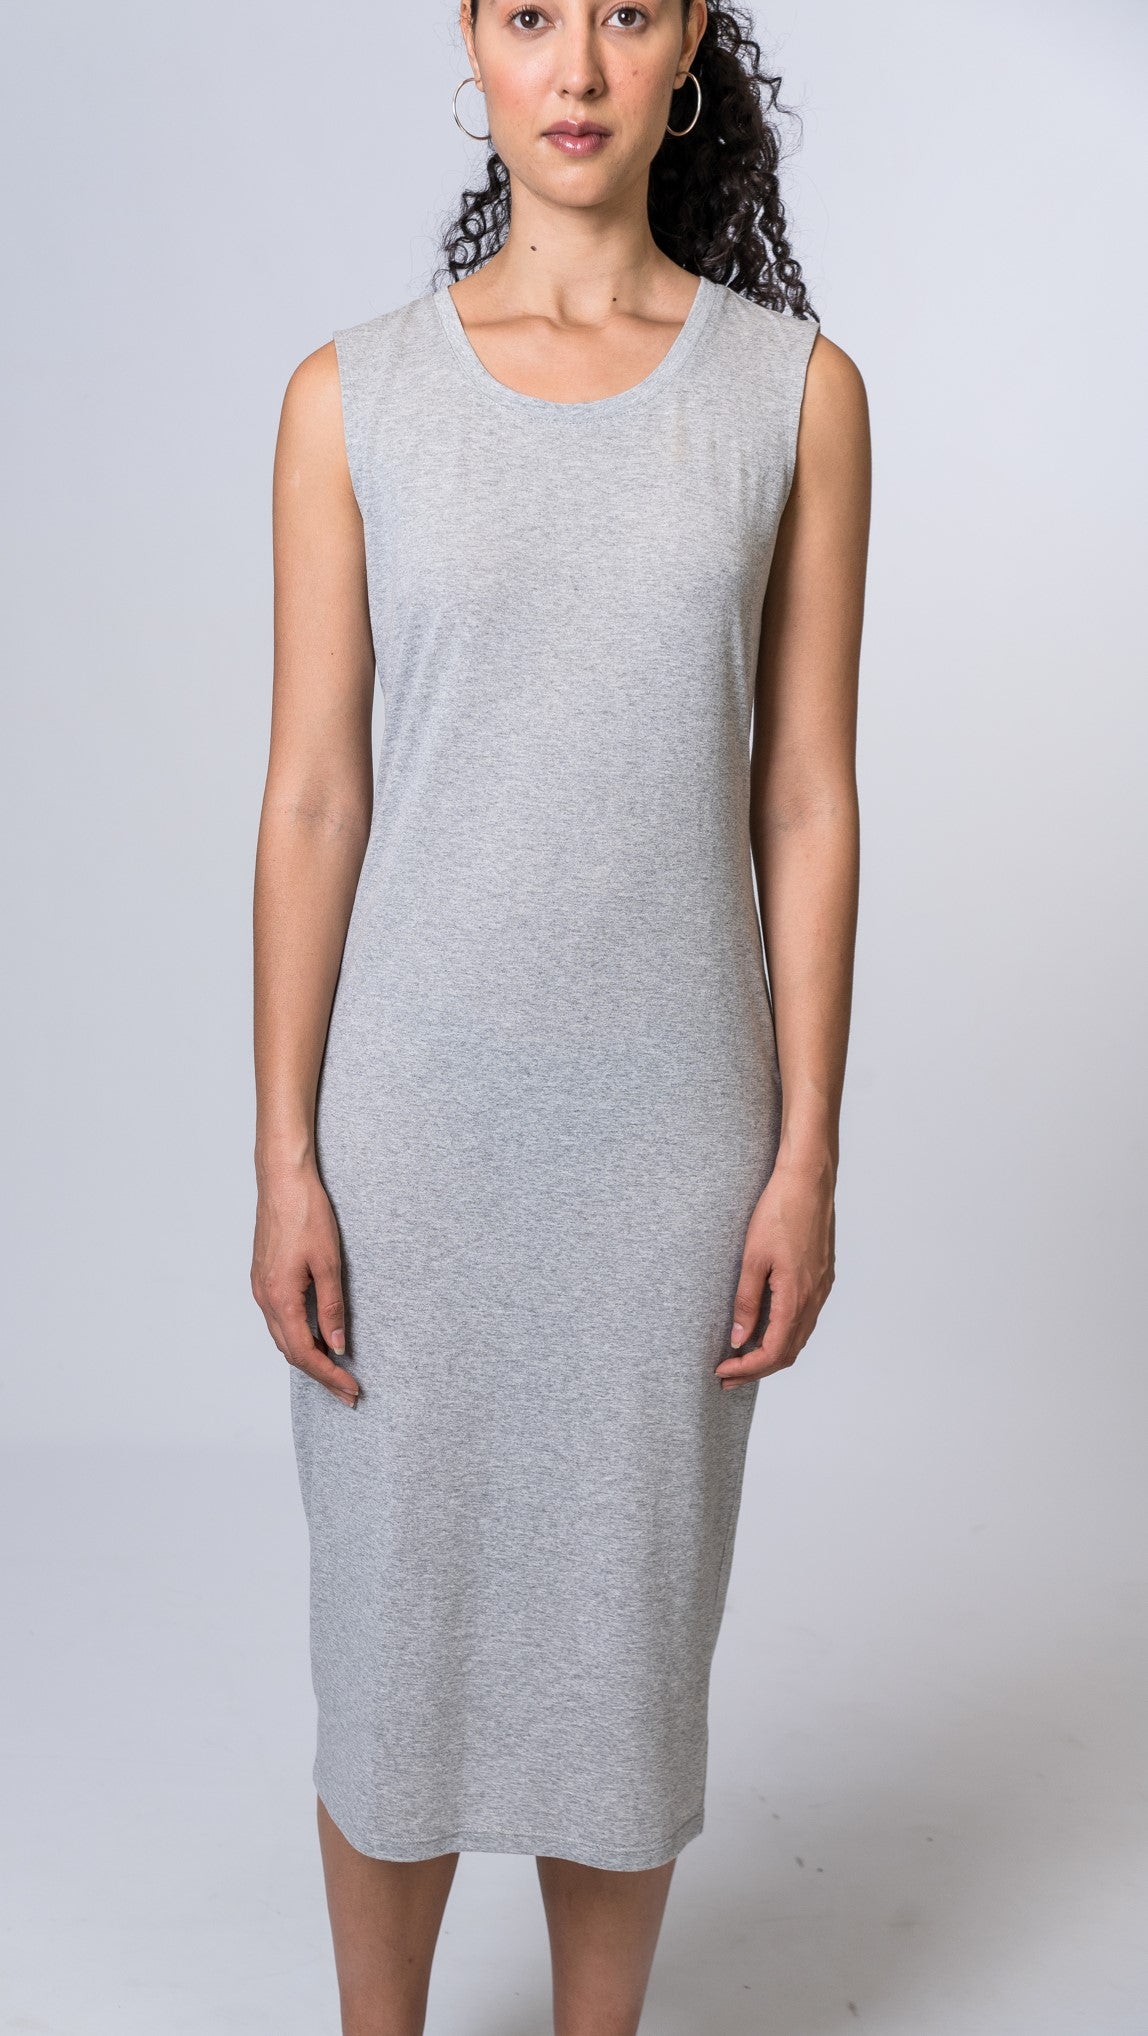 Woman wearing a light gray midi dress. Front of dress is being shown